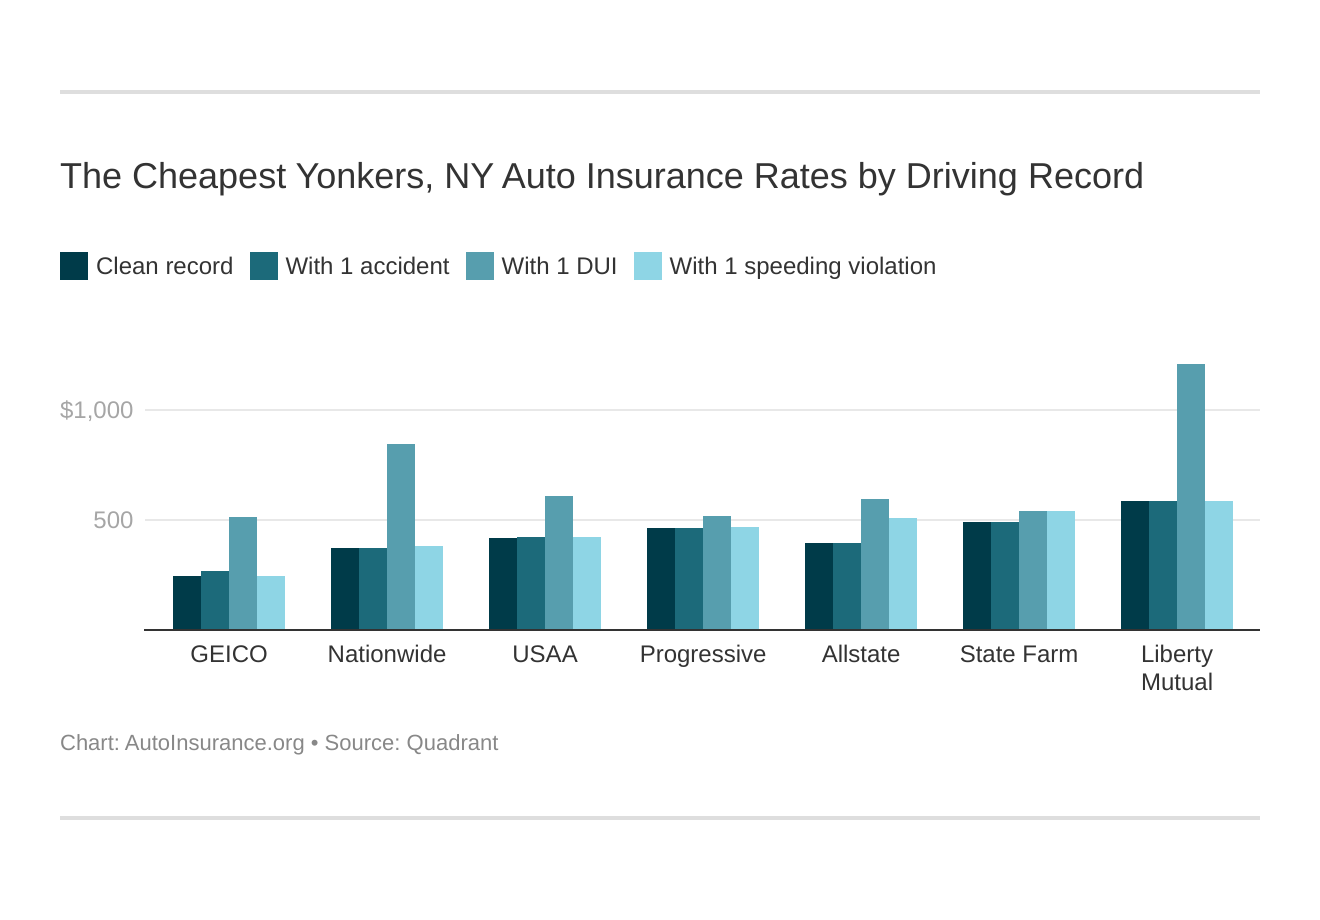 The Cheapest Yonkers, NY Auto Insurance Rates by Driving Record